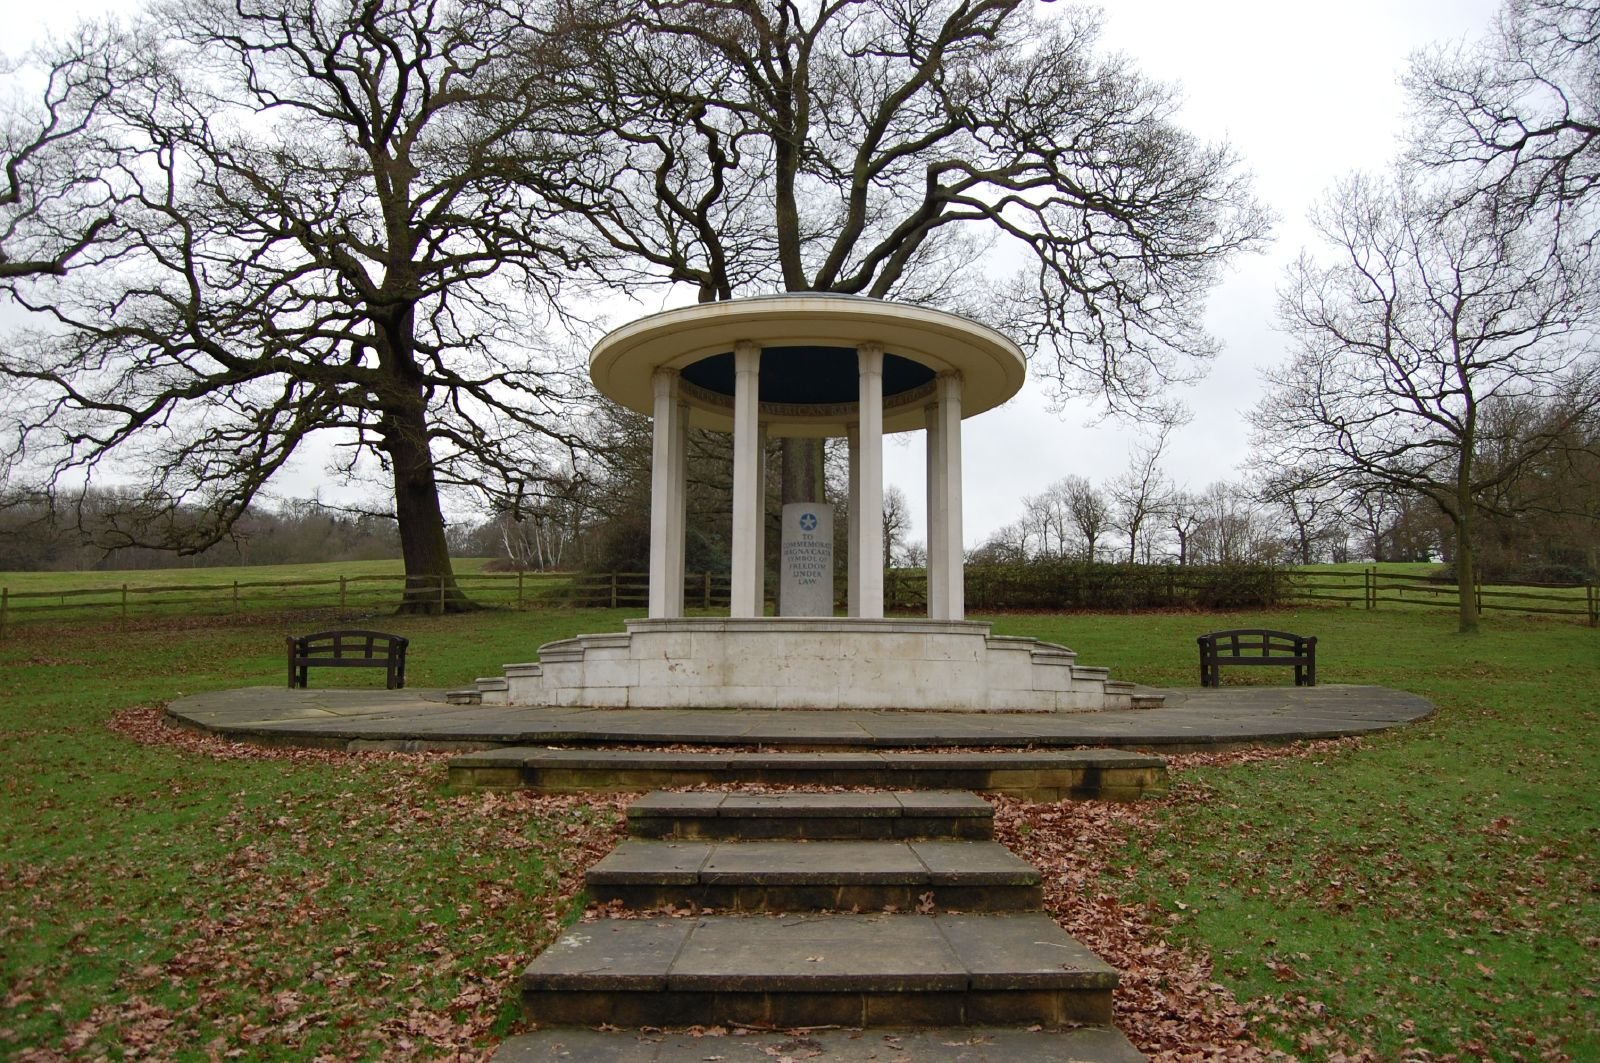 "Magna Carta Monument" by bekra (Ben E Kinrade) is licensed under CC BY-SA 2.0. To view a copy of this license, visit https://creativecommons.org/licenses/by-sa/2.0/?ref=openverse.